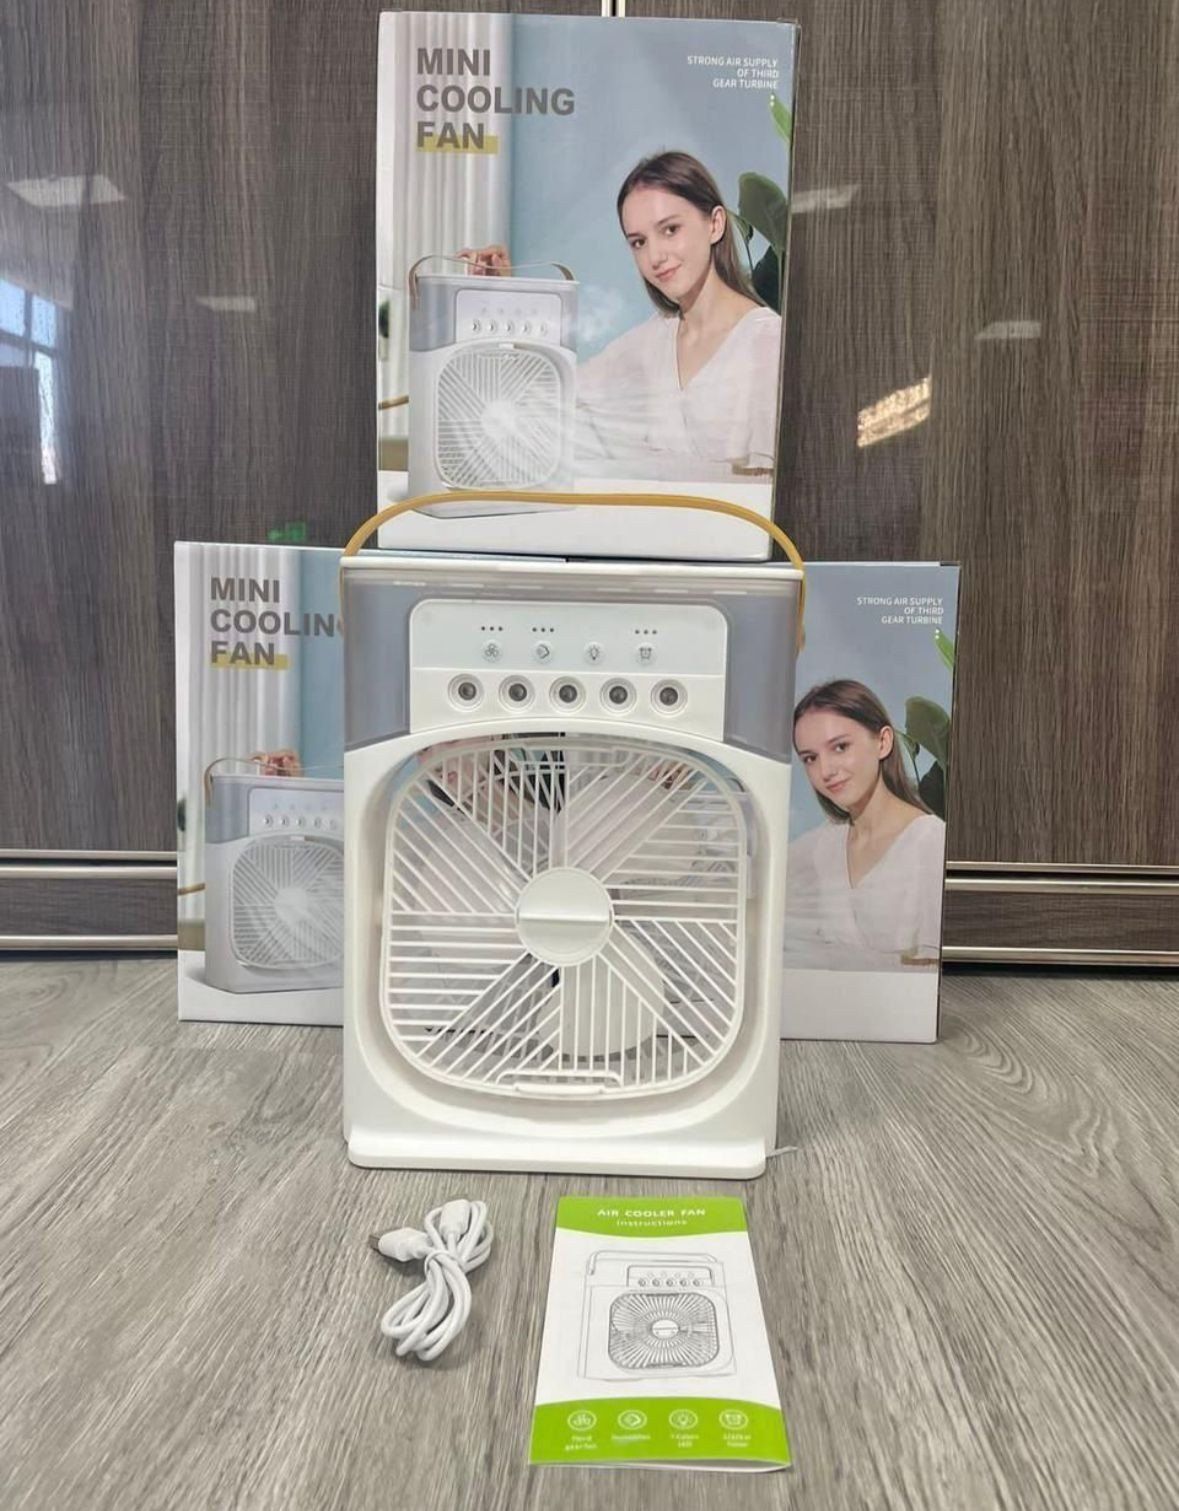 Mini-cooler-for room-cooling-mini-cooler-ac-portable-air-conditioners-for Home-Office-Artic-Cooler-3-In-1-Conditioner-Humidifier-Purifier-Mini-Cooler-air-conditioners-mini-cooler-cooling